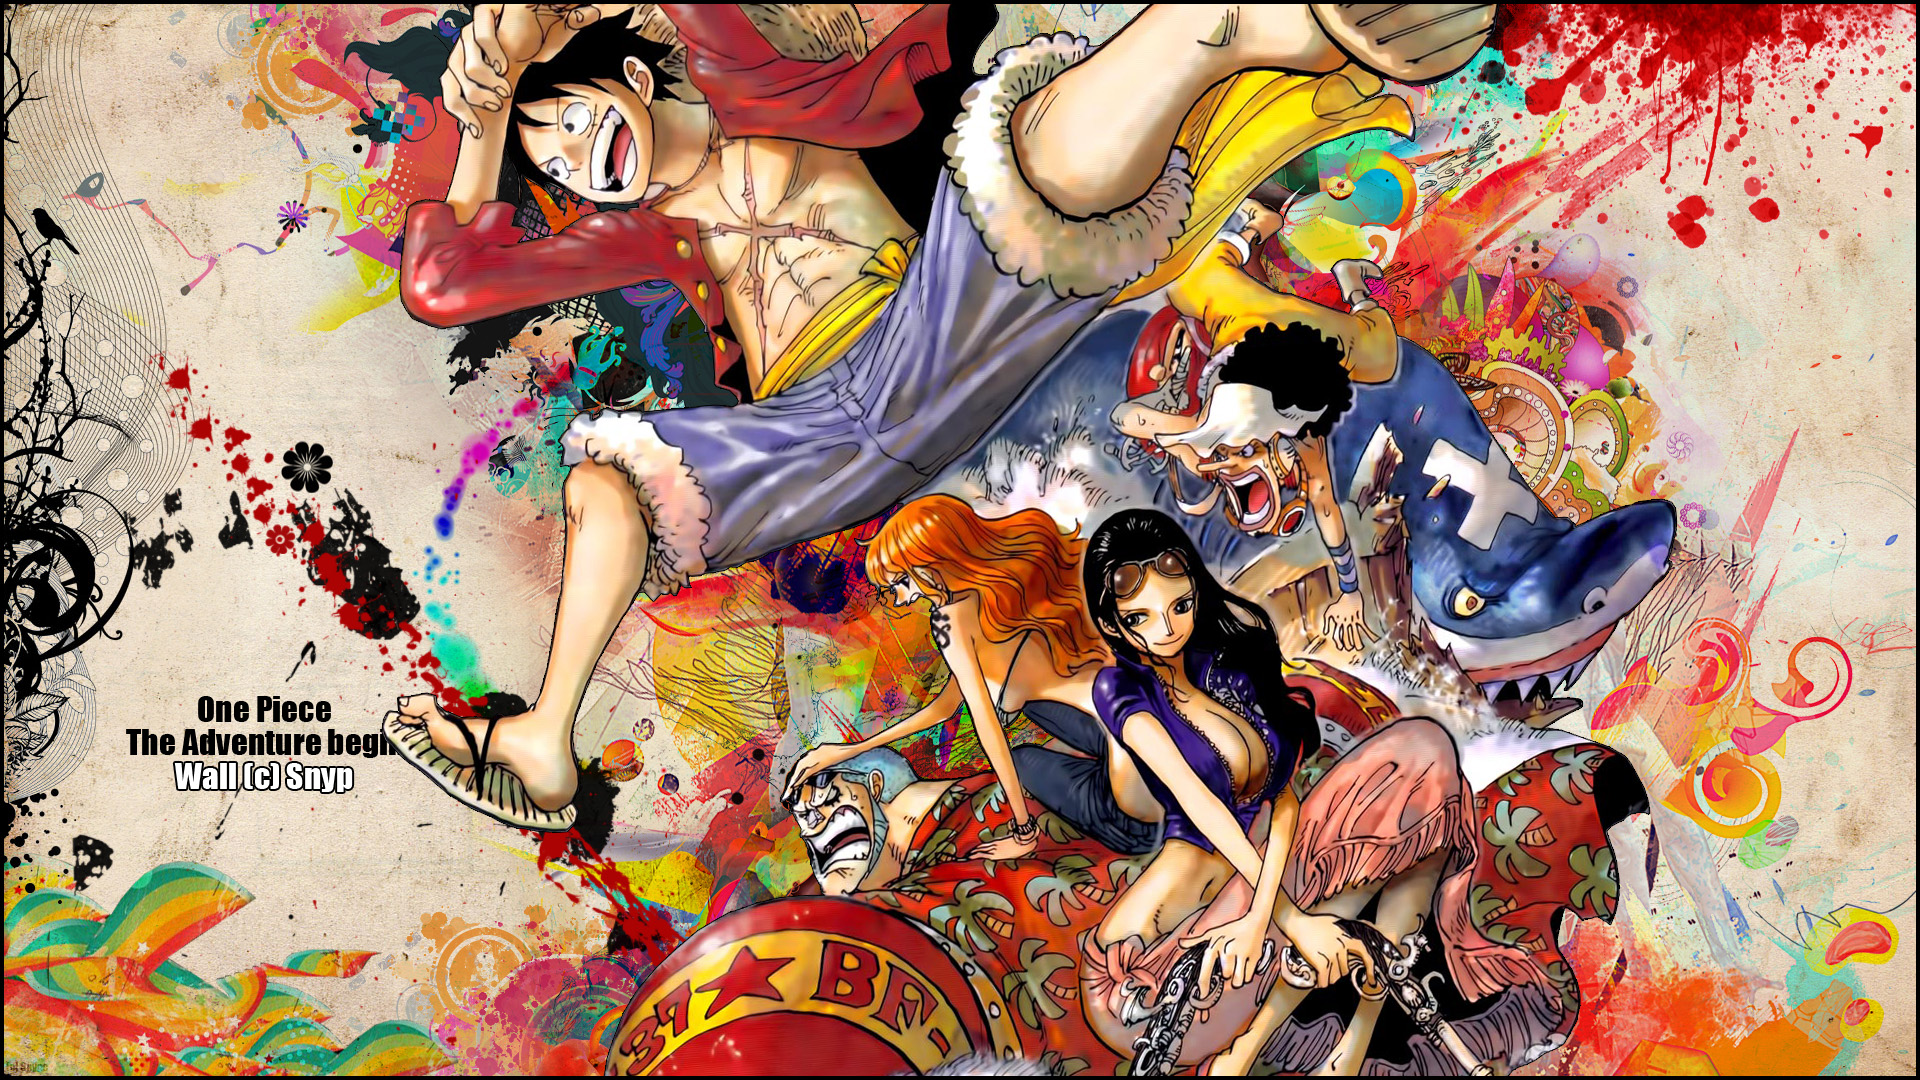 One Piece Wallpaper New World High Def Wallpaper with 1920x1080